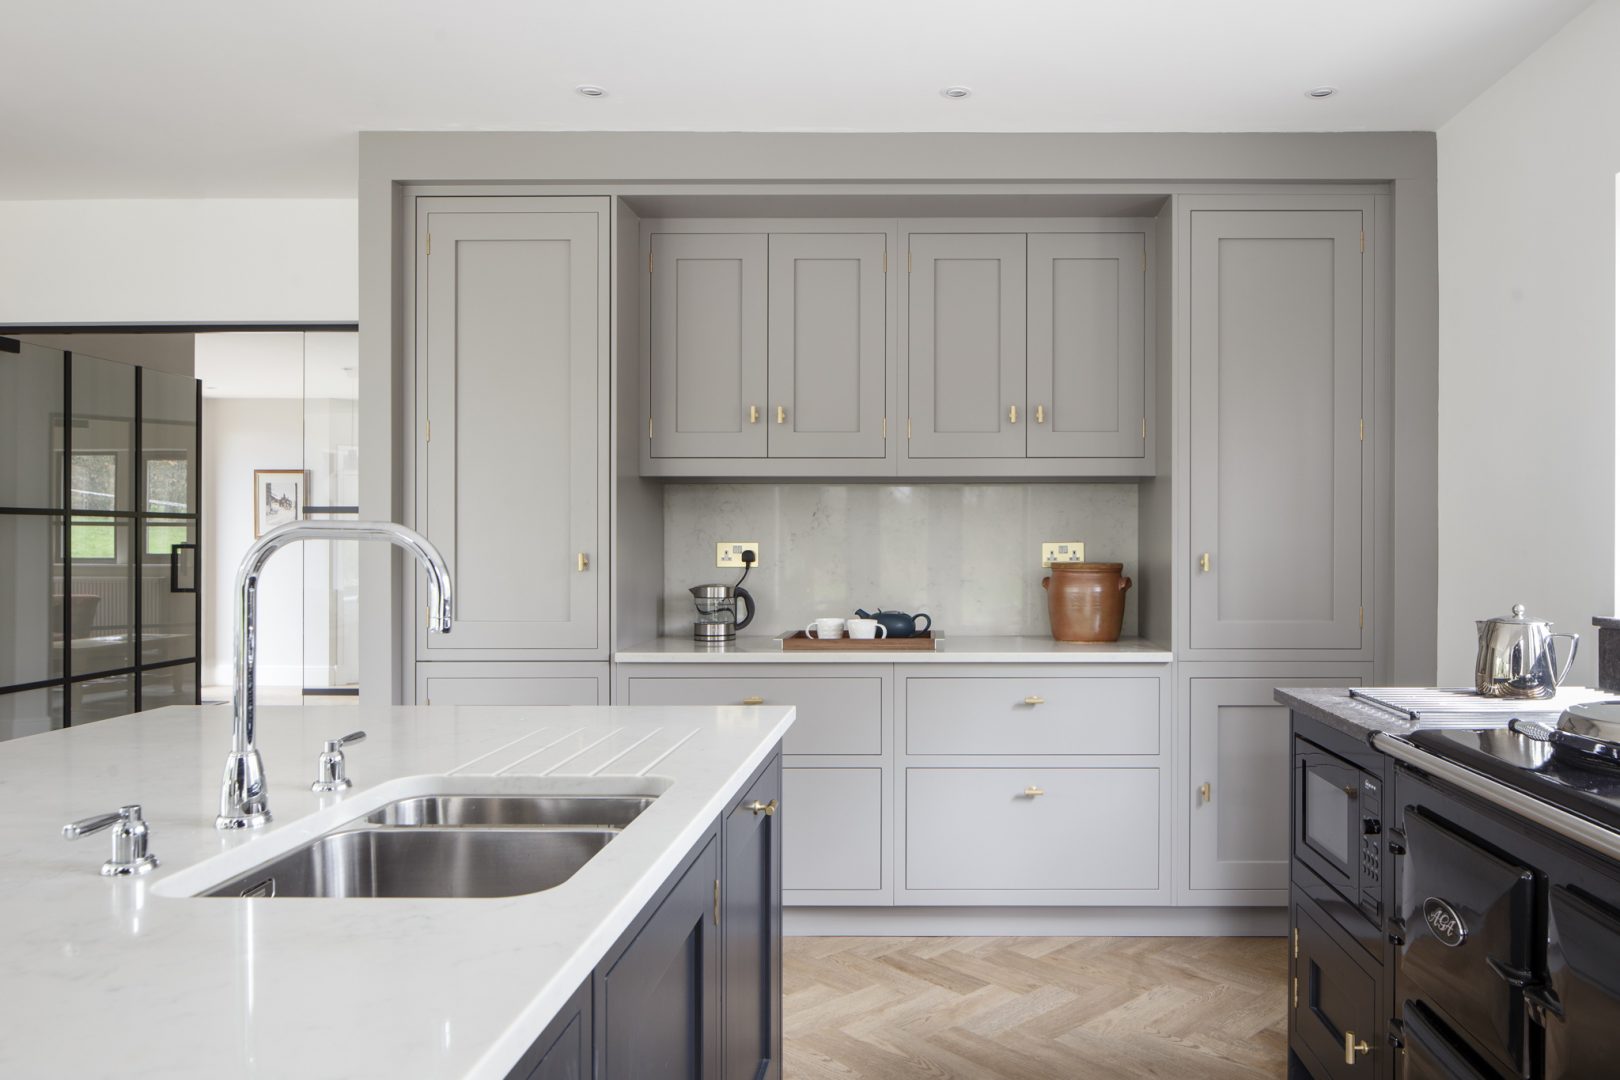 handmade shaker kitchen with a kitchen island in shades of grey